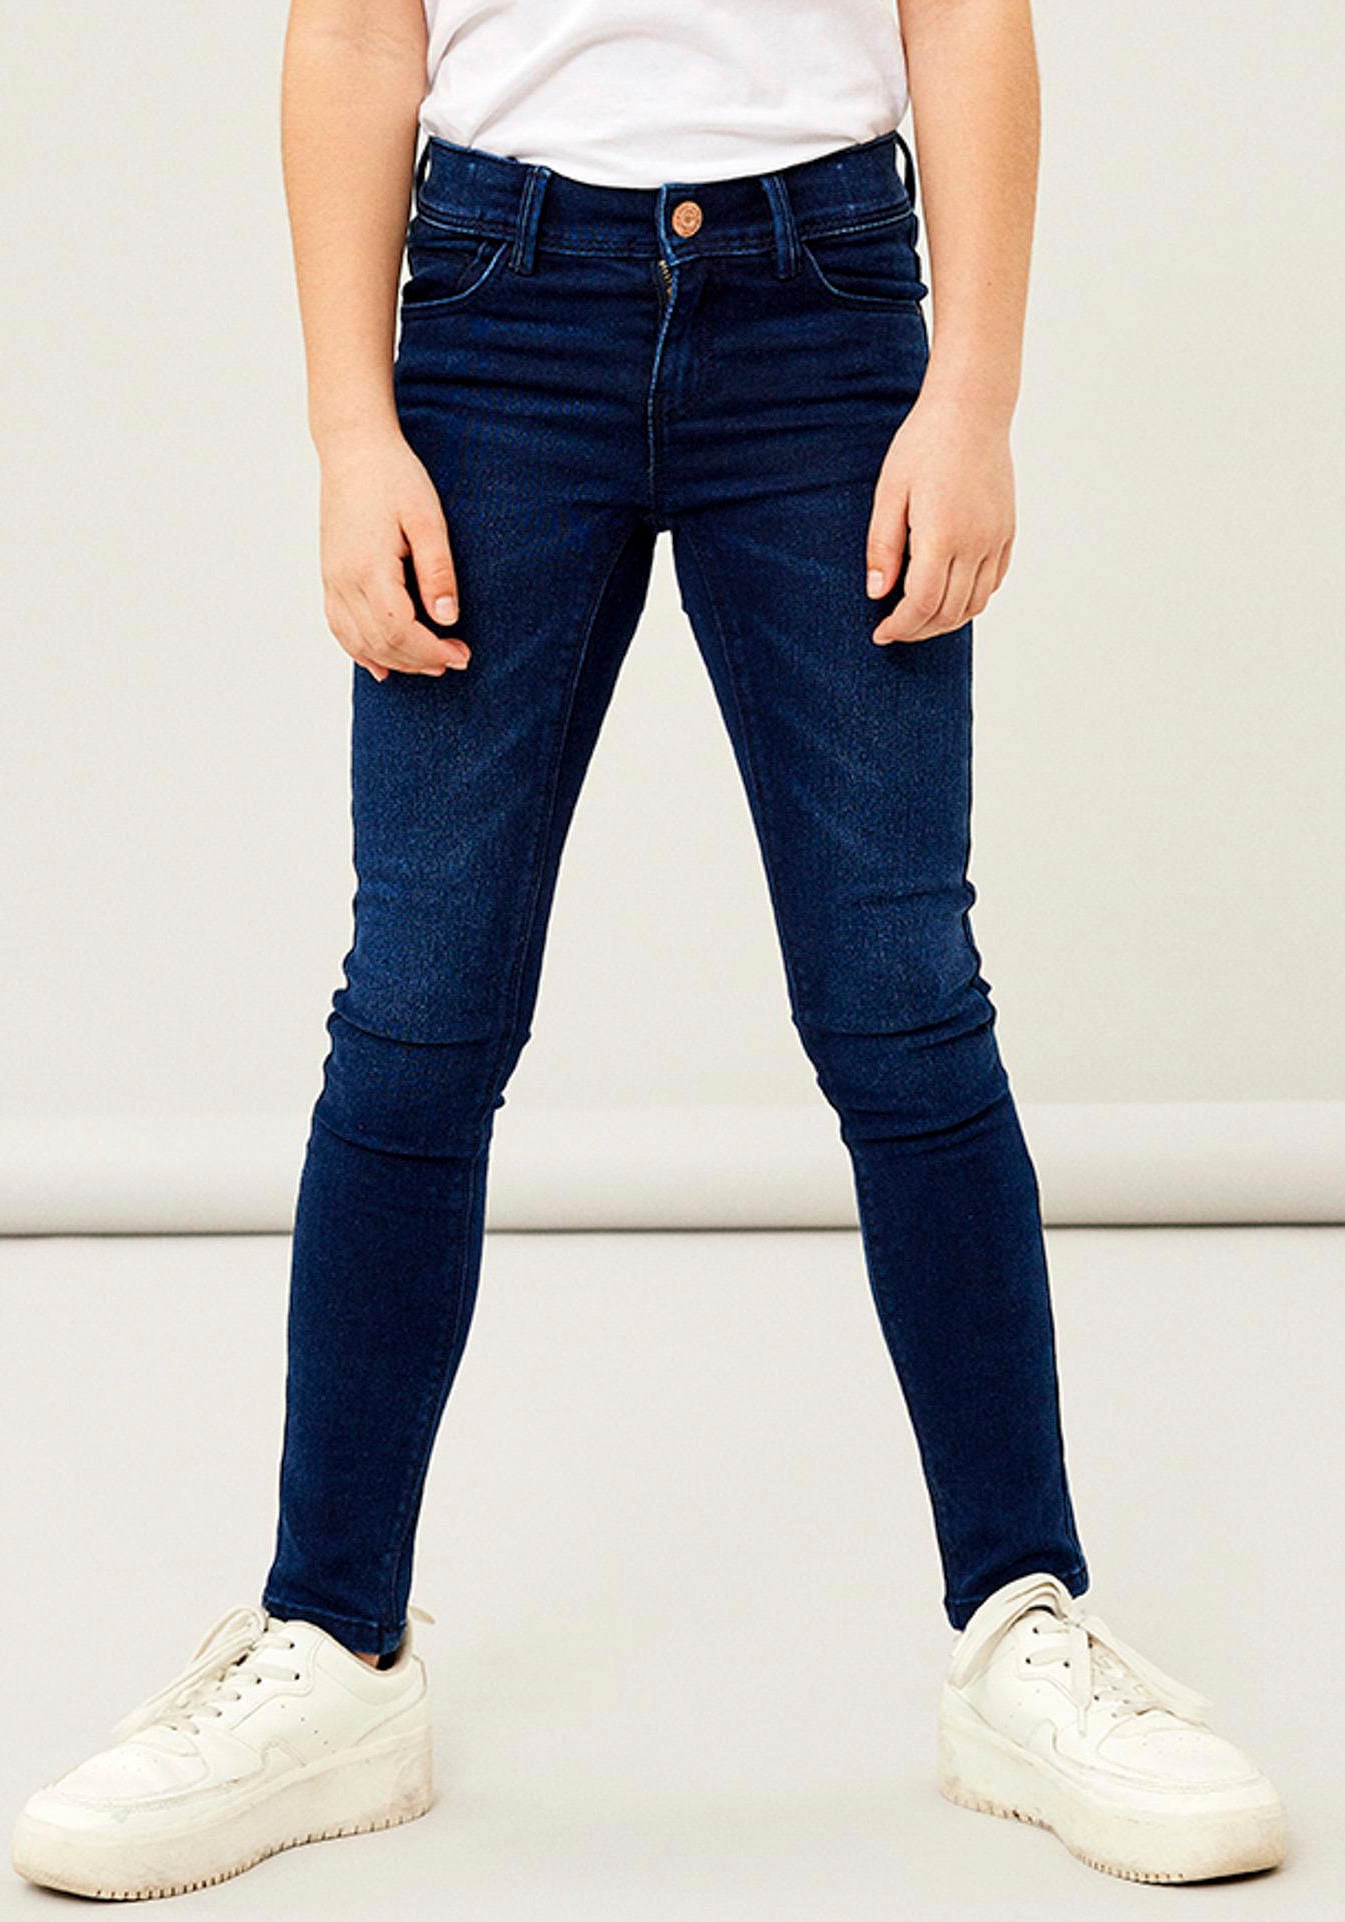 Name It Stretch-Jeans »NKFPOLLY DNMTAX PANT«, aus bequemem Stretchdenim